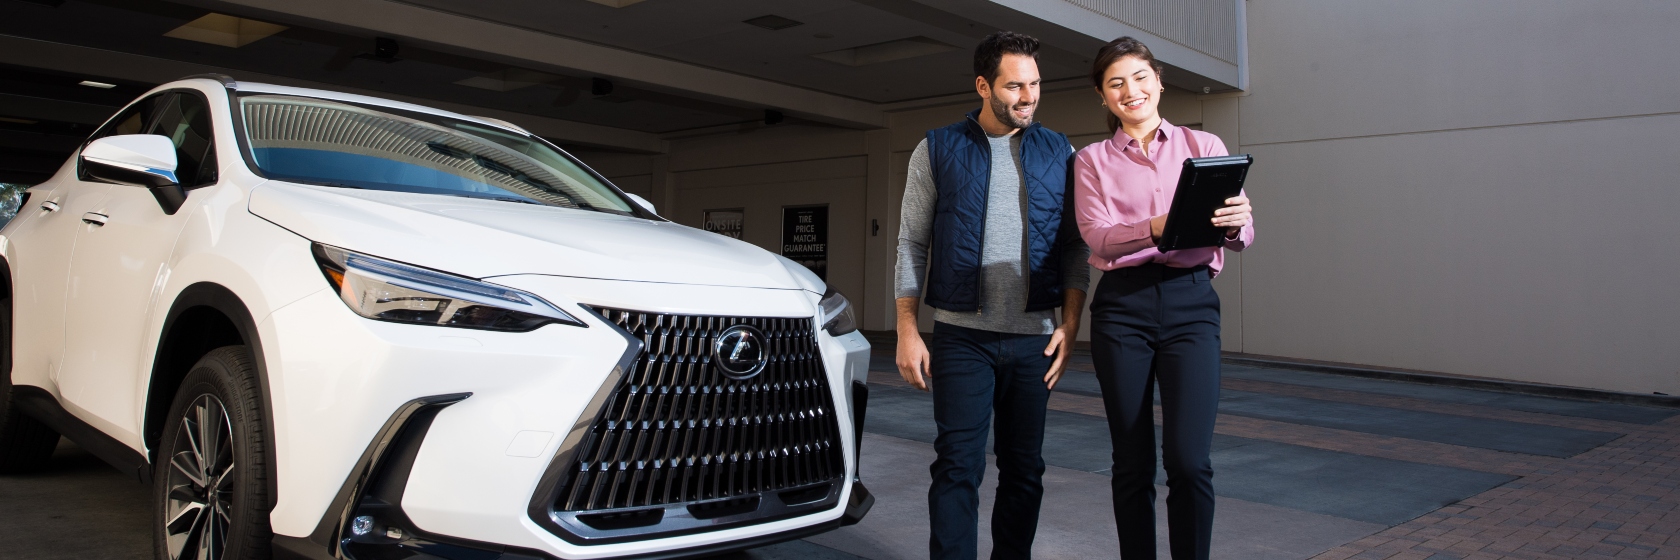 lexus-warranty-peace-of-mind-for-every-drive